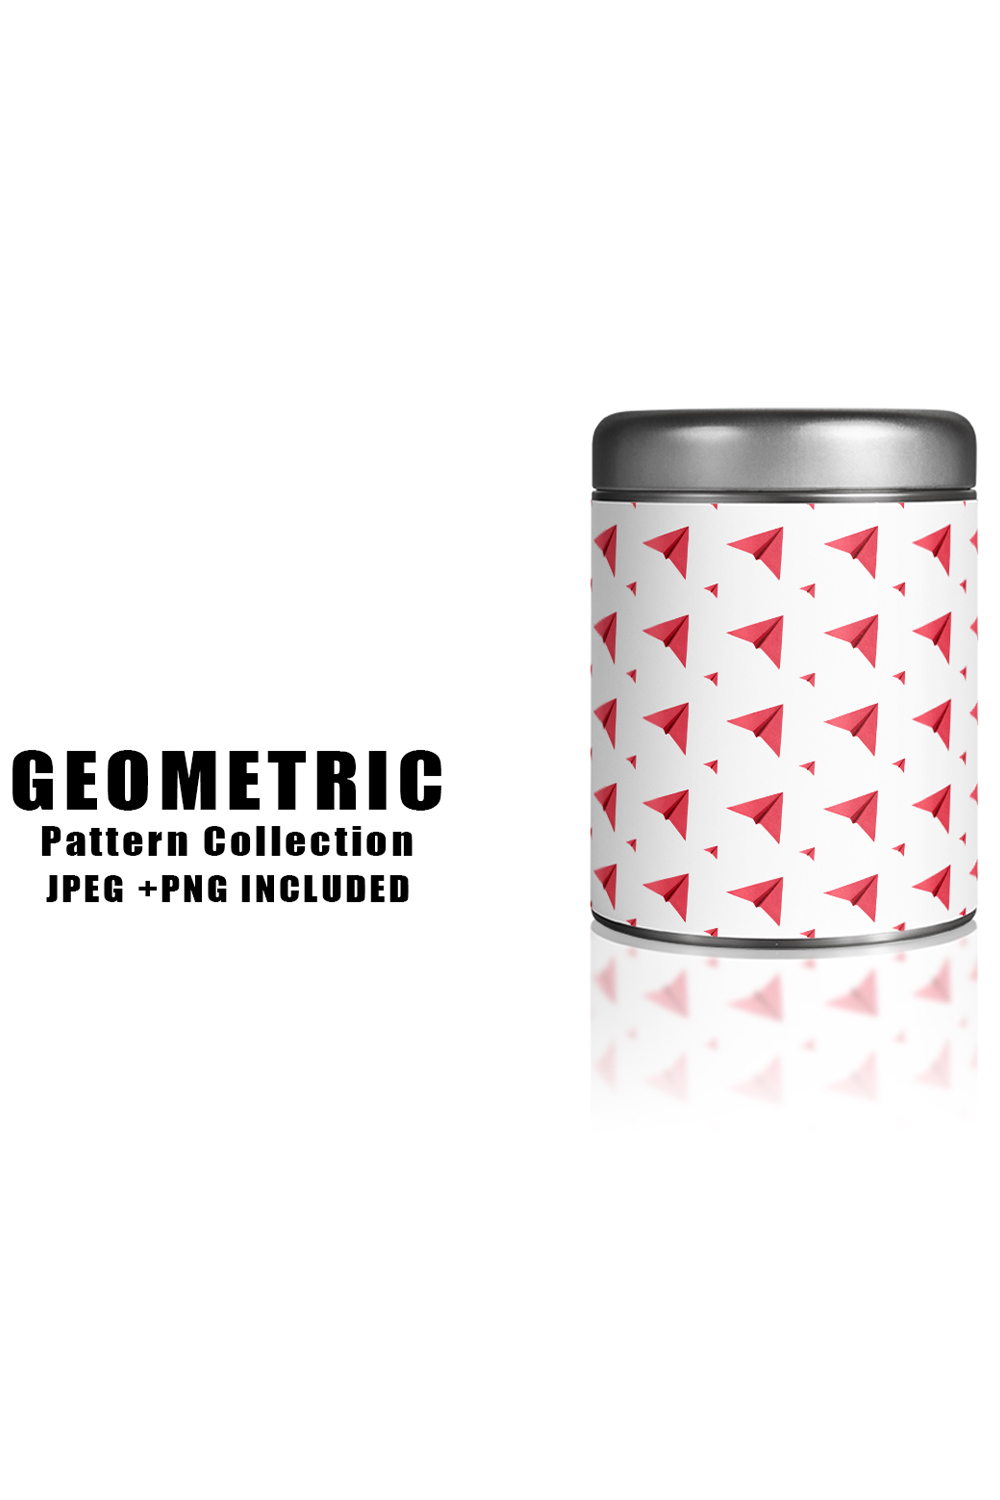 Image of a jar with amazing geometric patterns